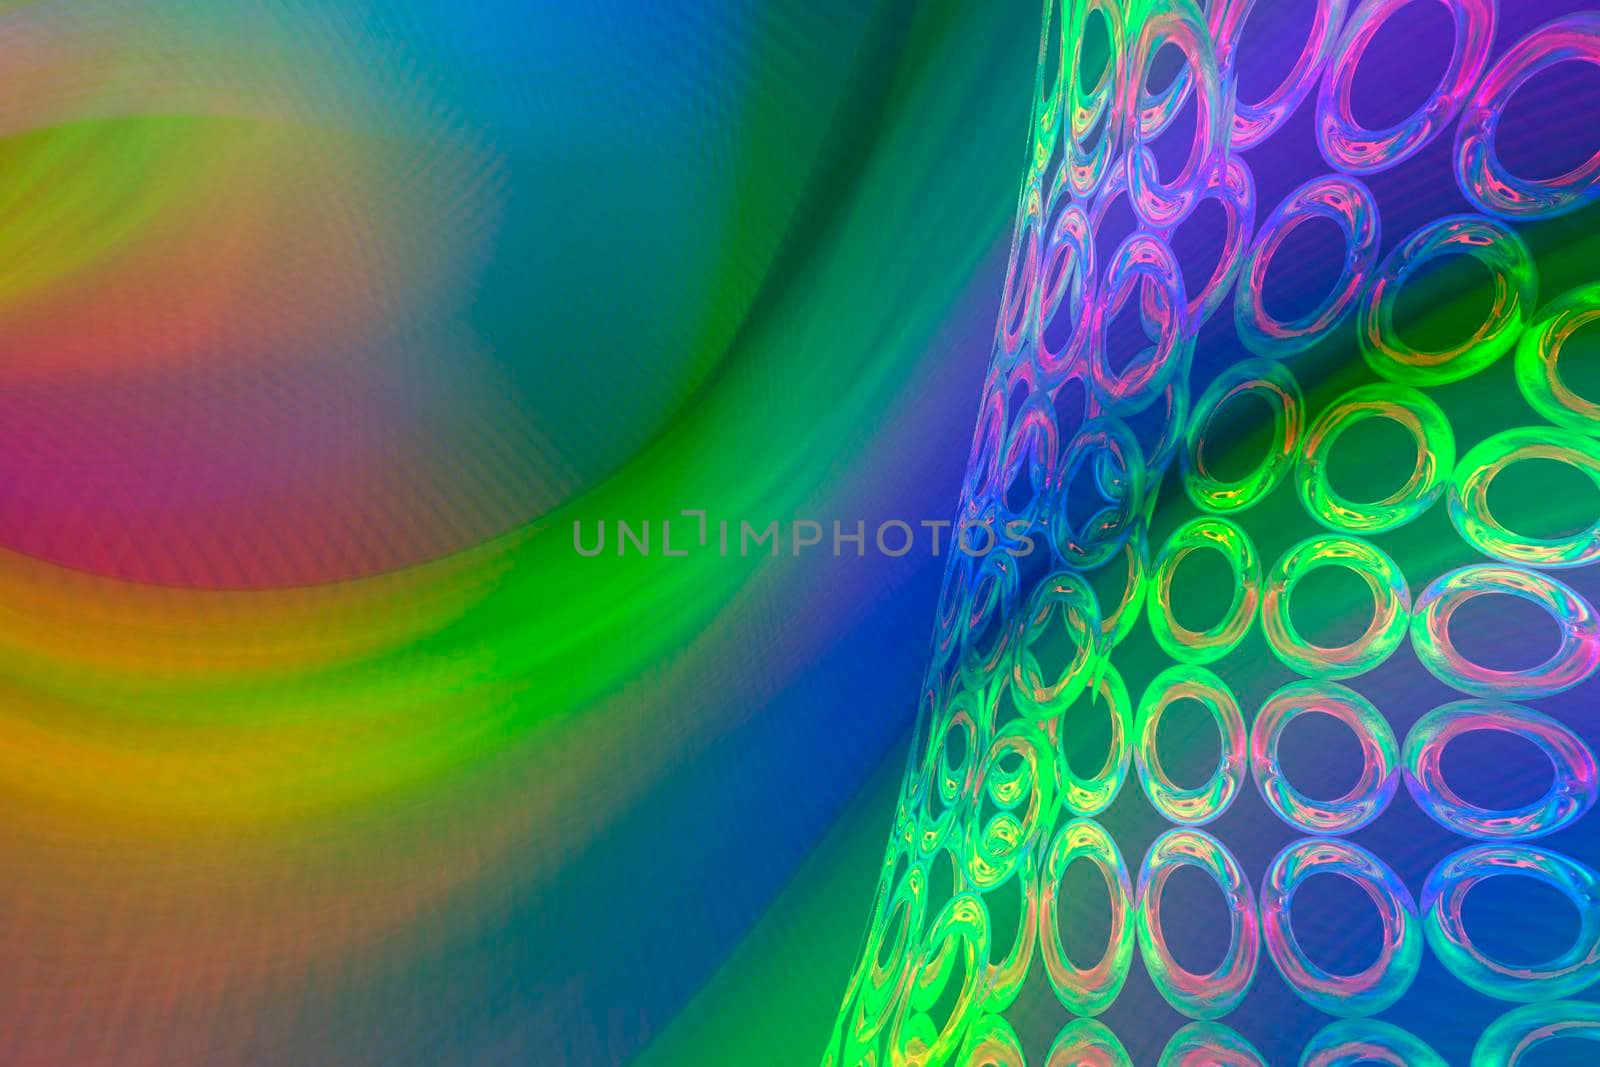 A beautiful rainbow background with an iridescent grid of rings by Vvicca